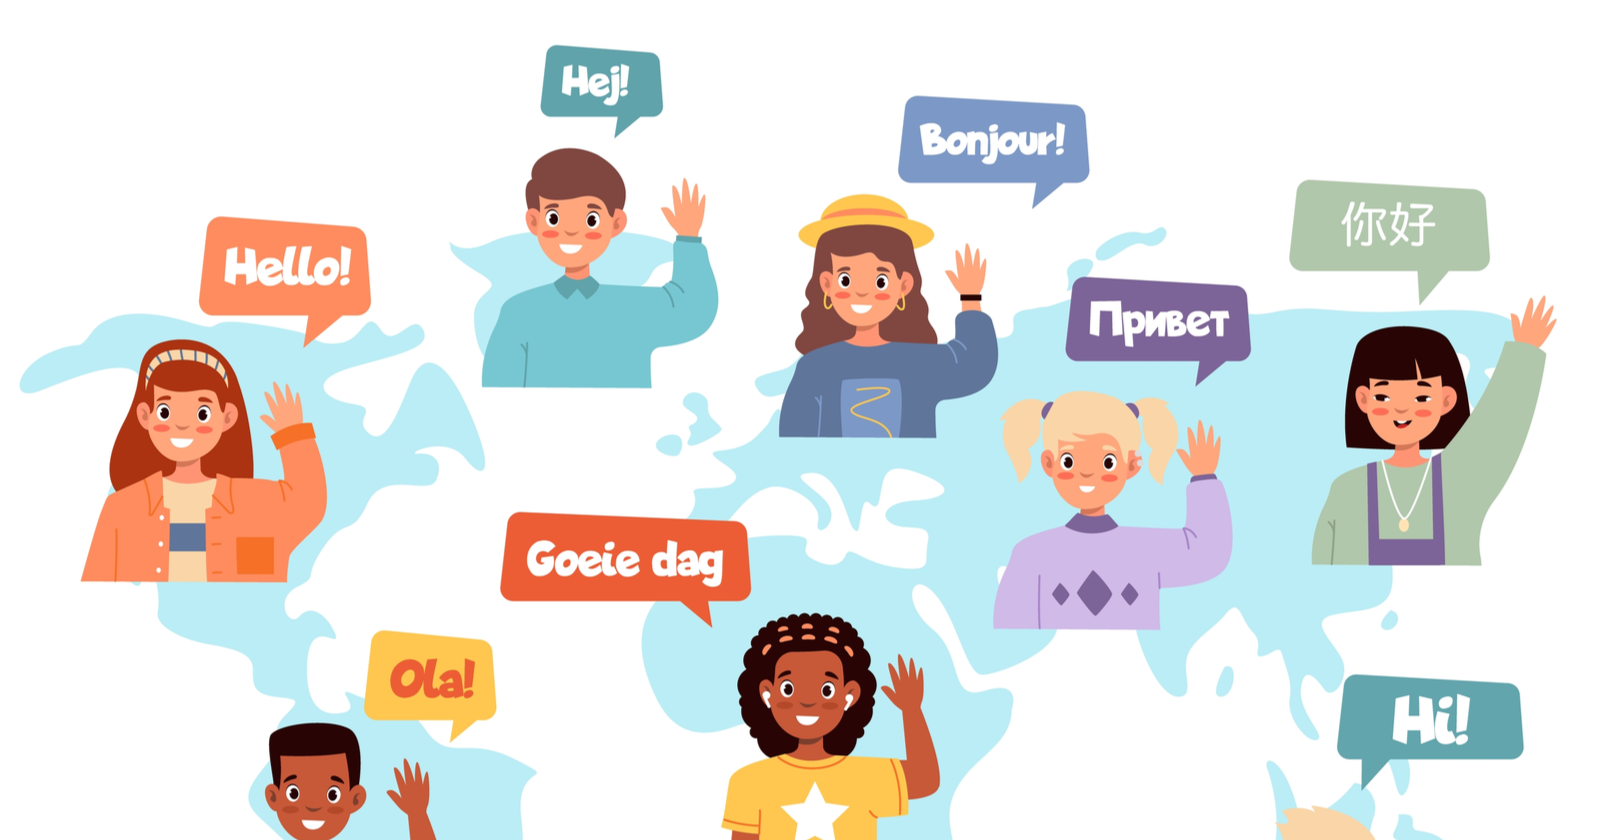 How Google Search Understands Human Language